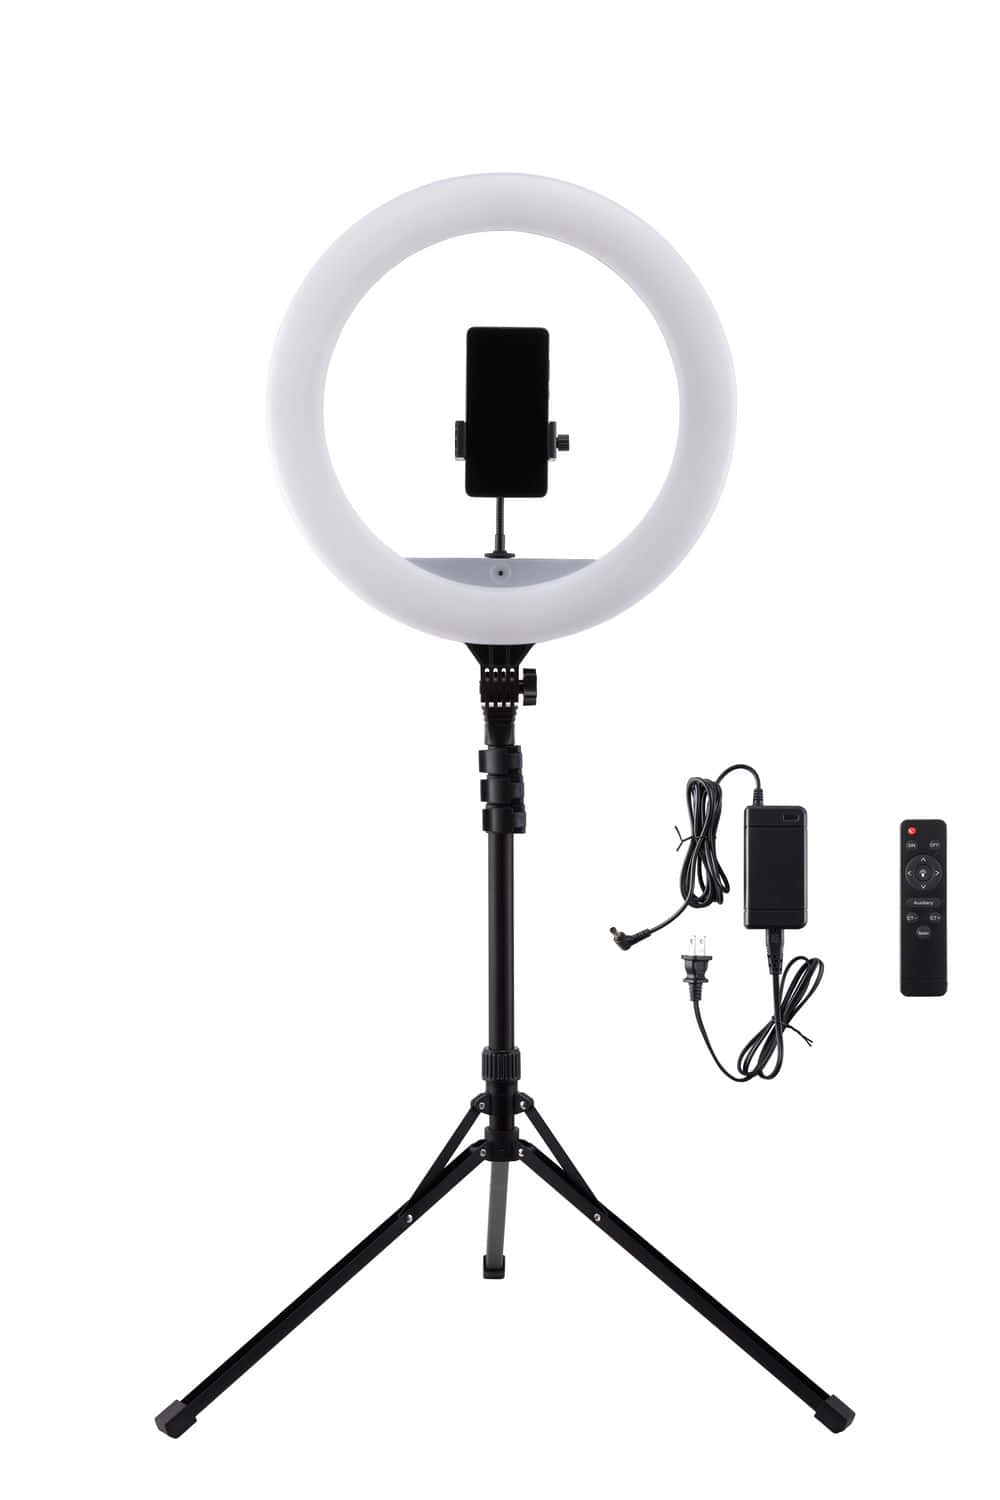 Light up your shots to perfection with a Ring Light.